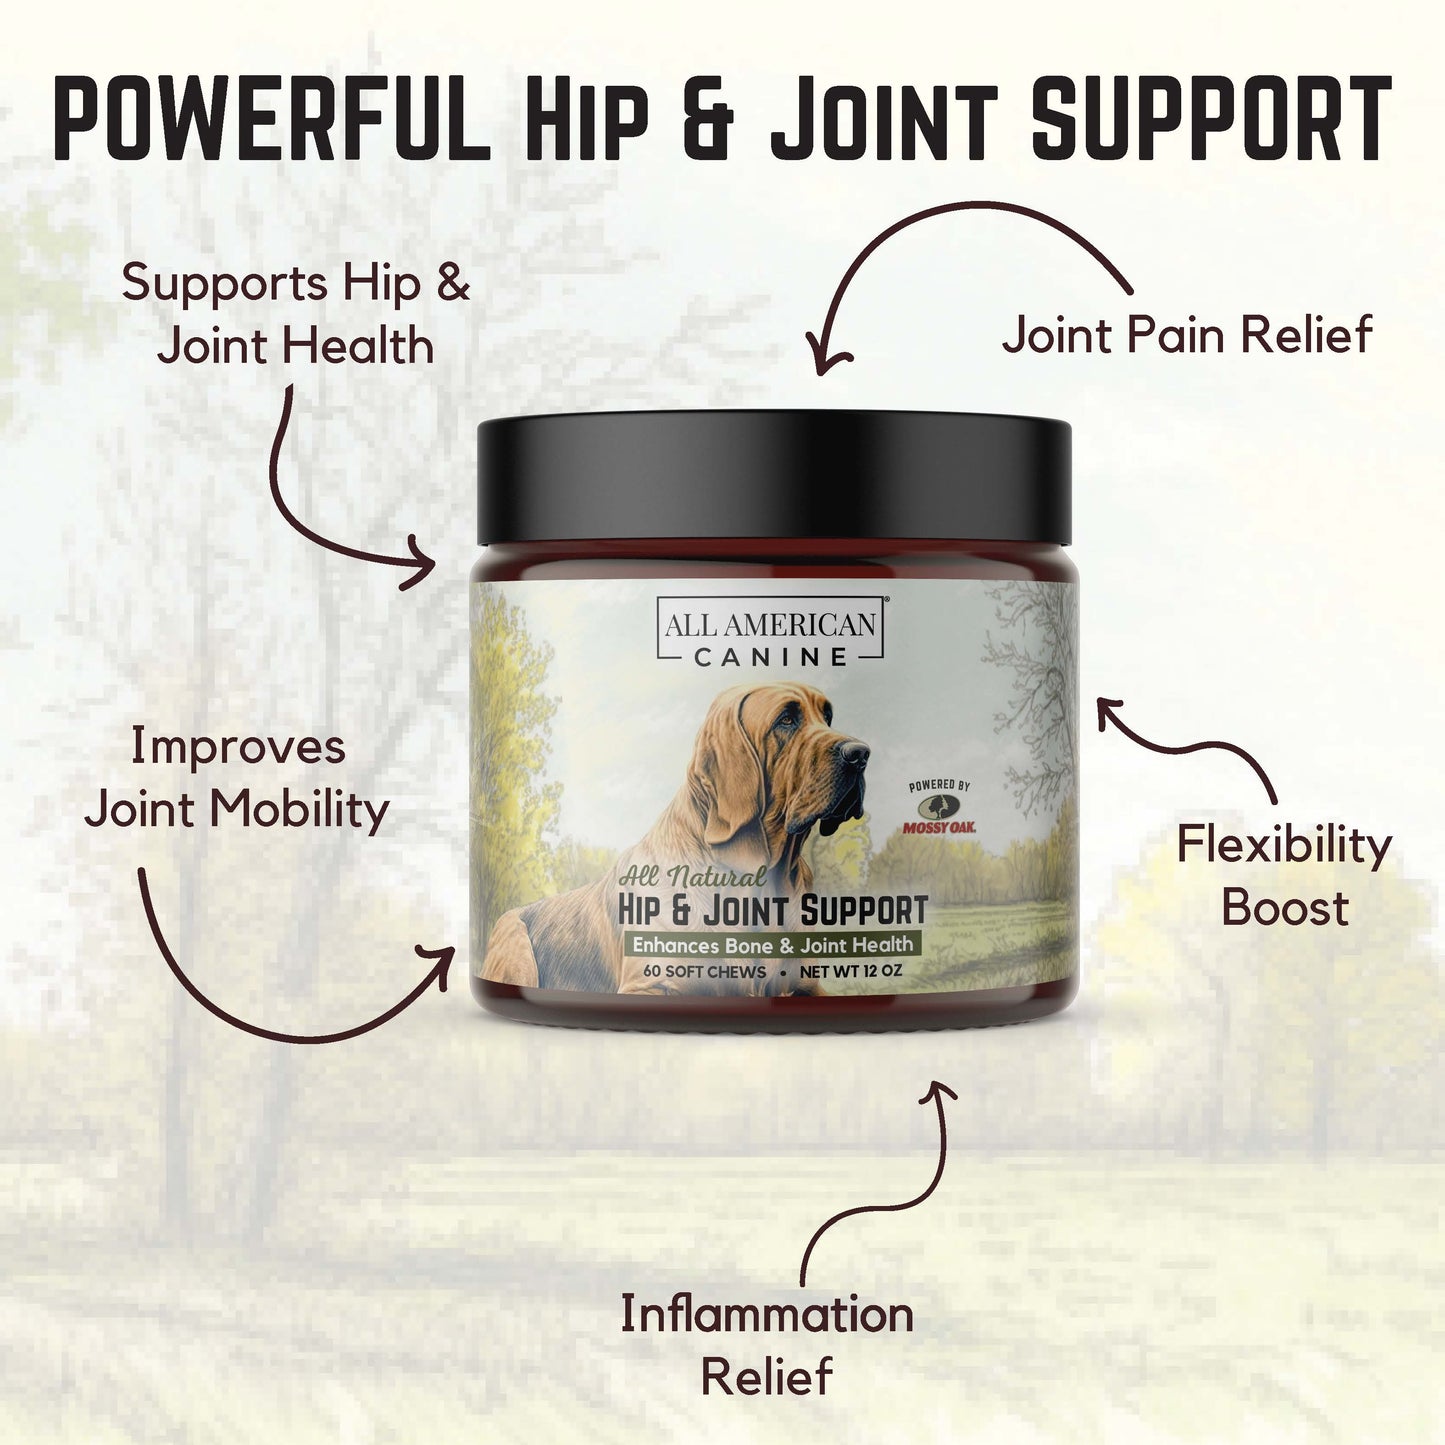 Hip & Joint Support